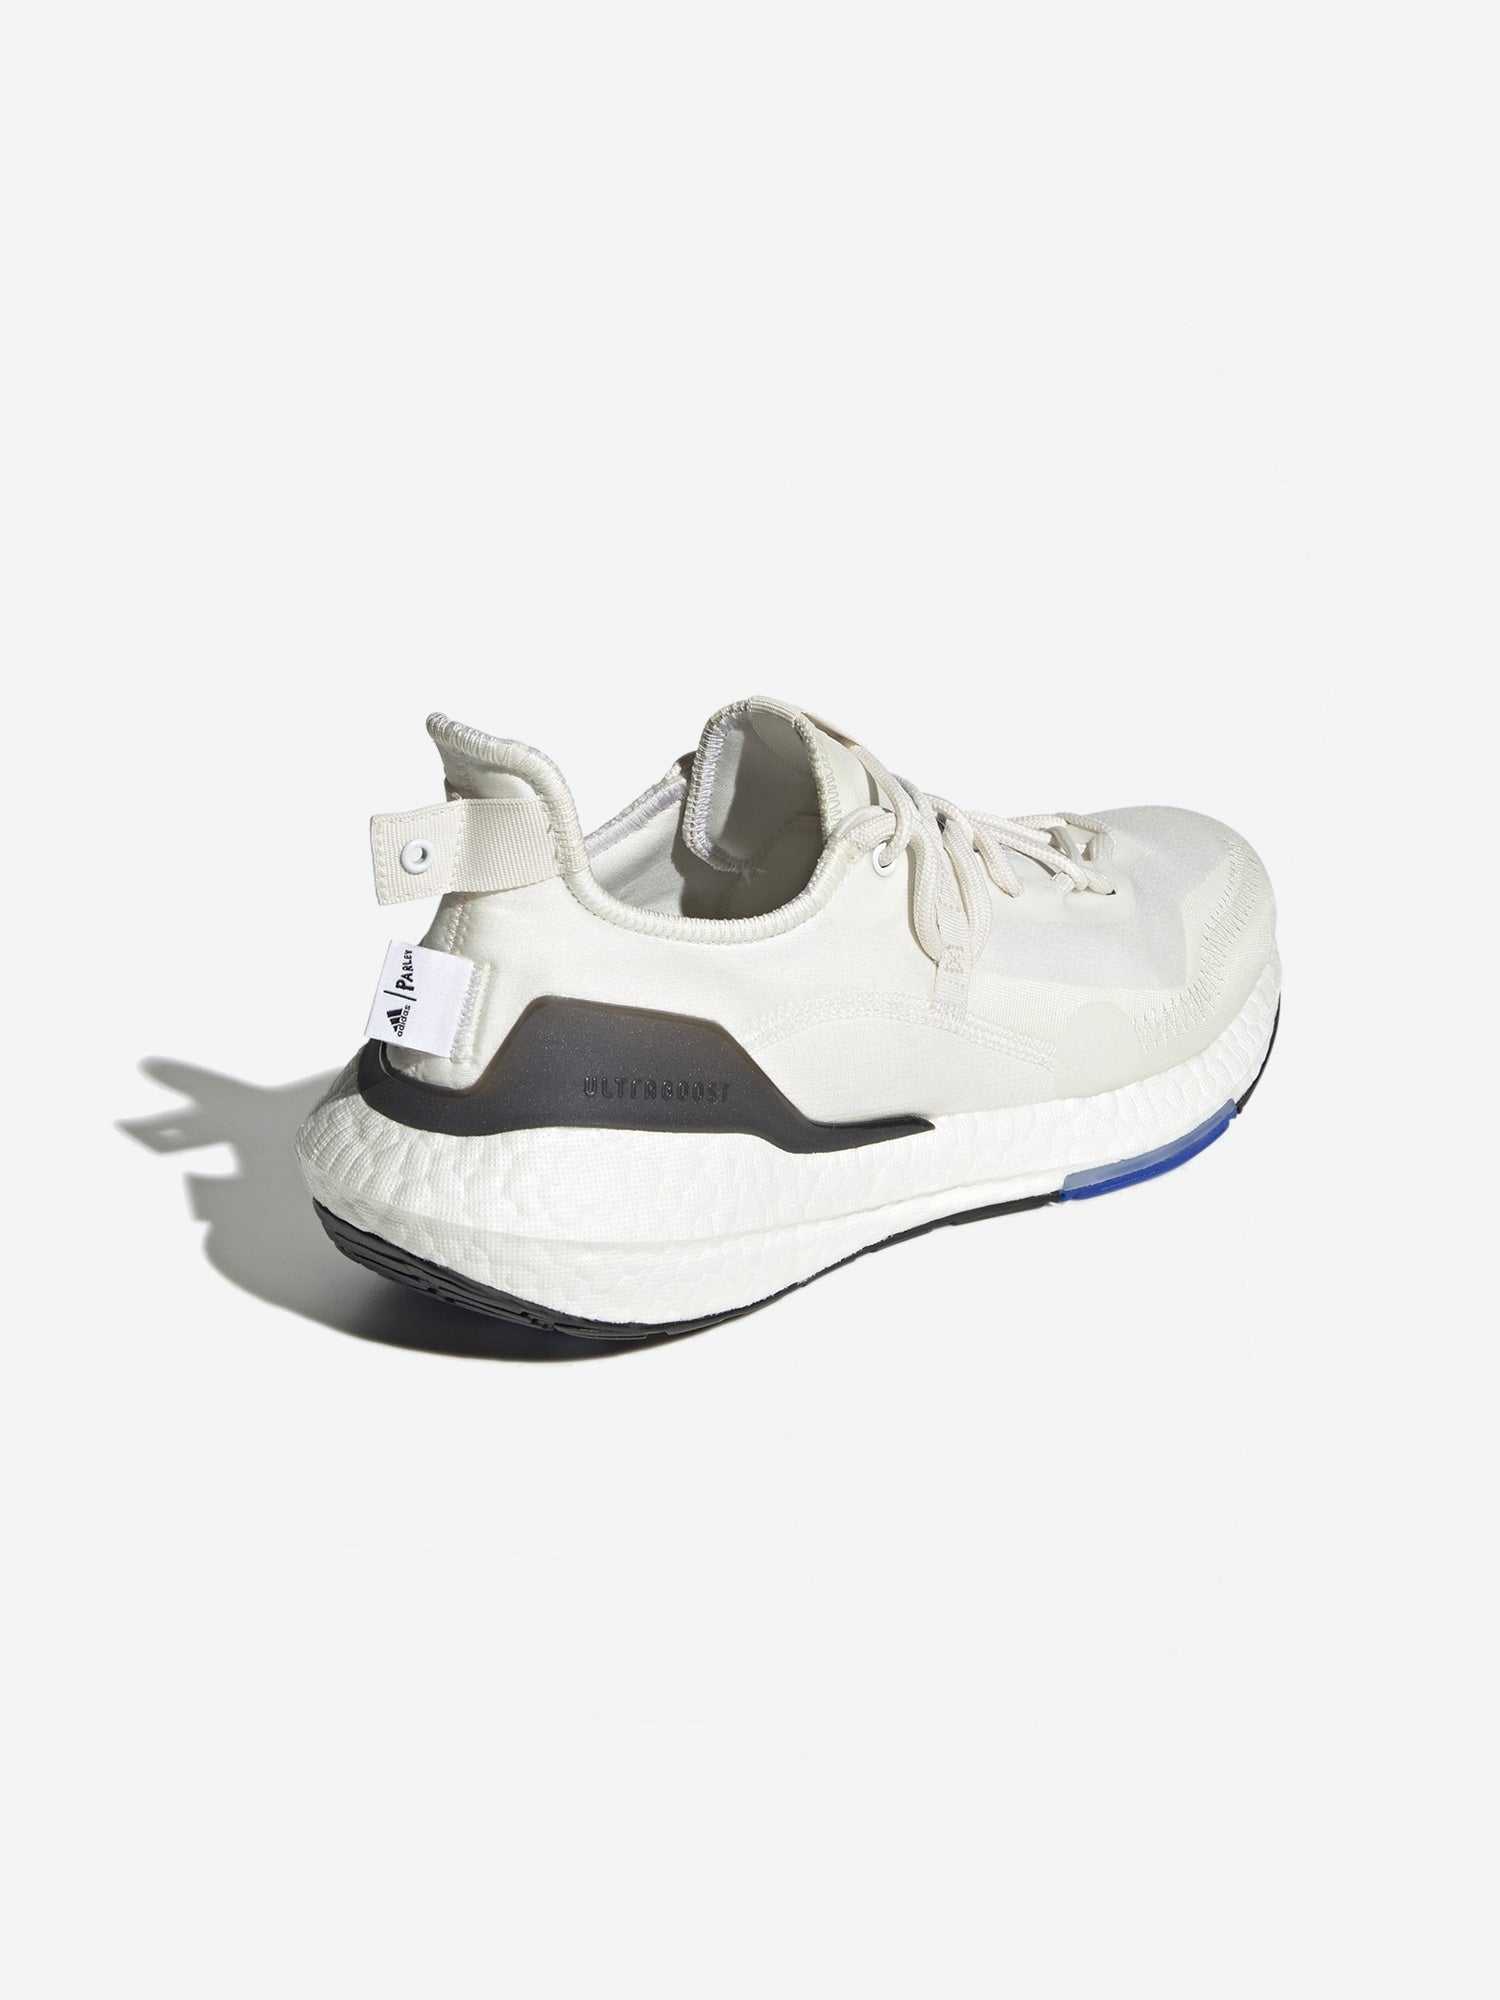 adidas ultraboost 21 stores